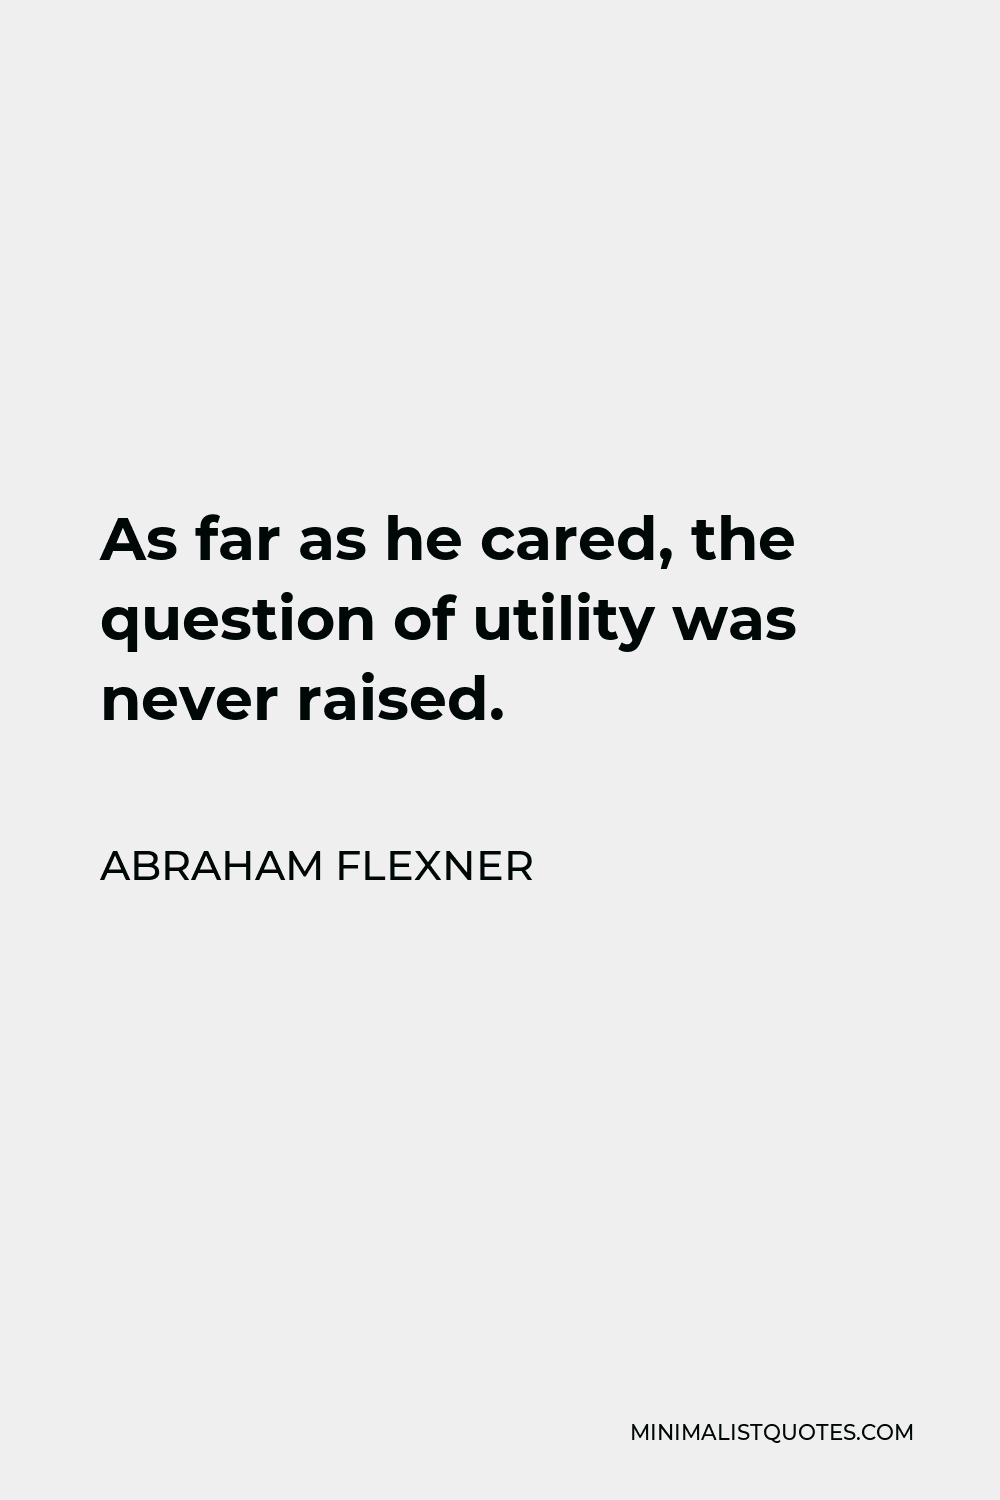 Abraham Flexner Quote - As far as he cared, the question of utility was never raised.